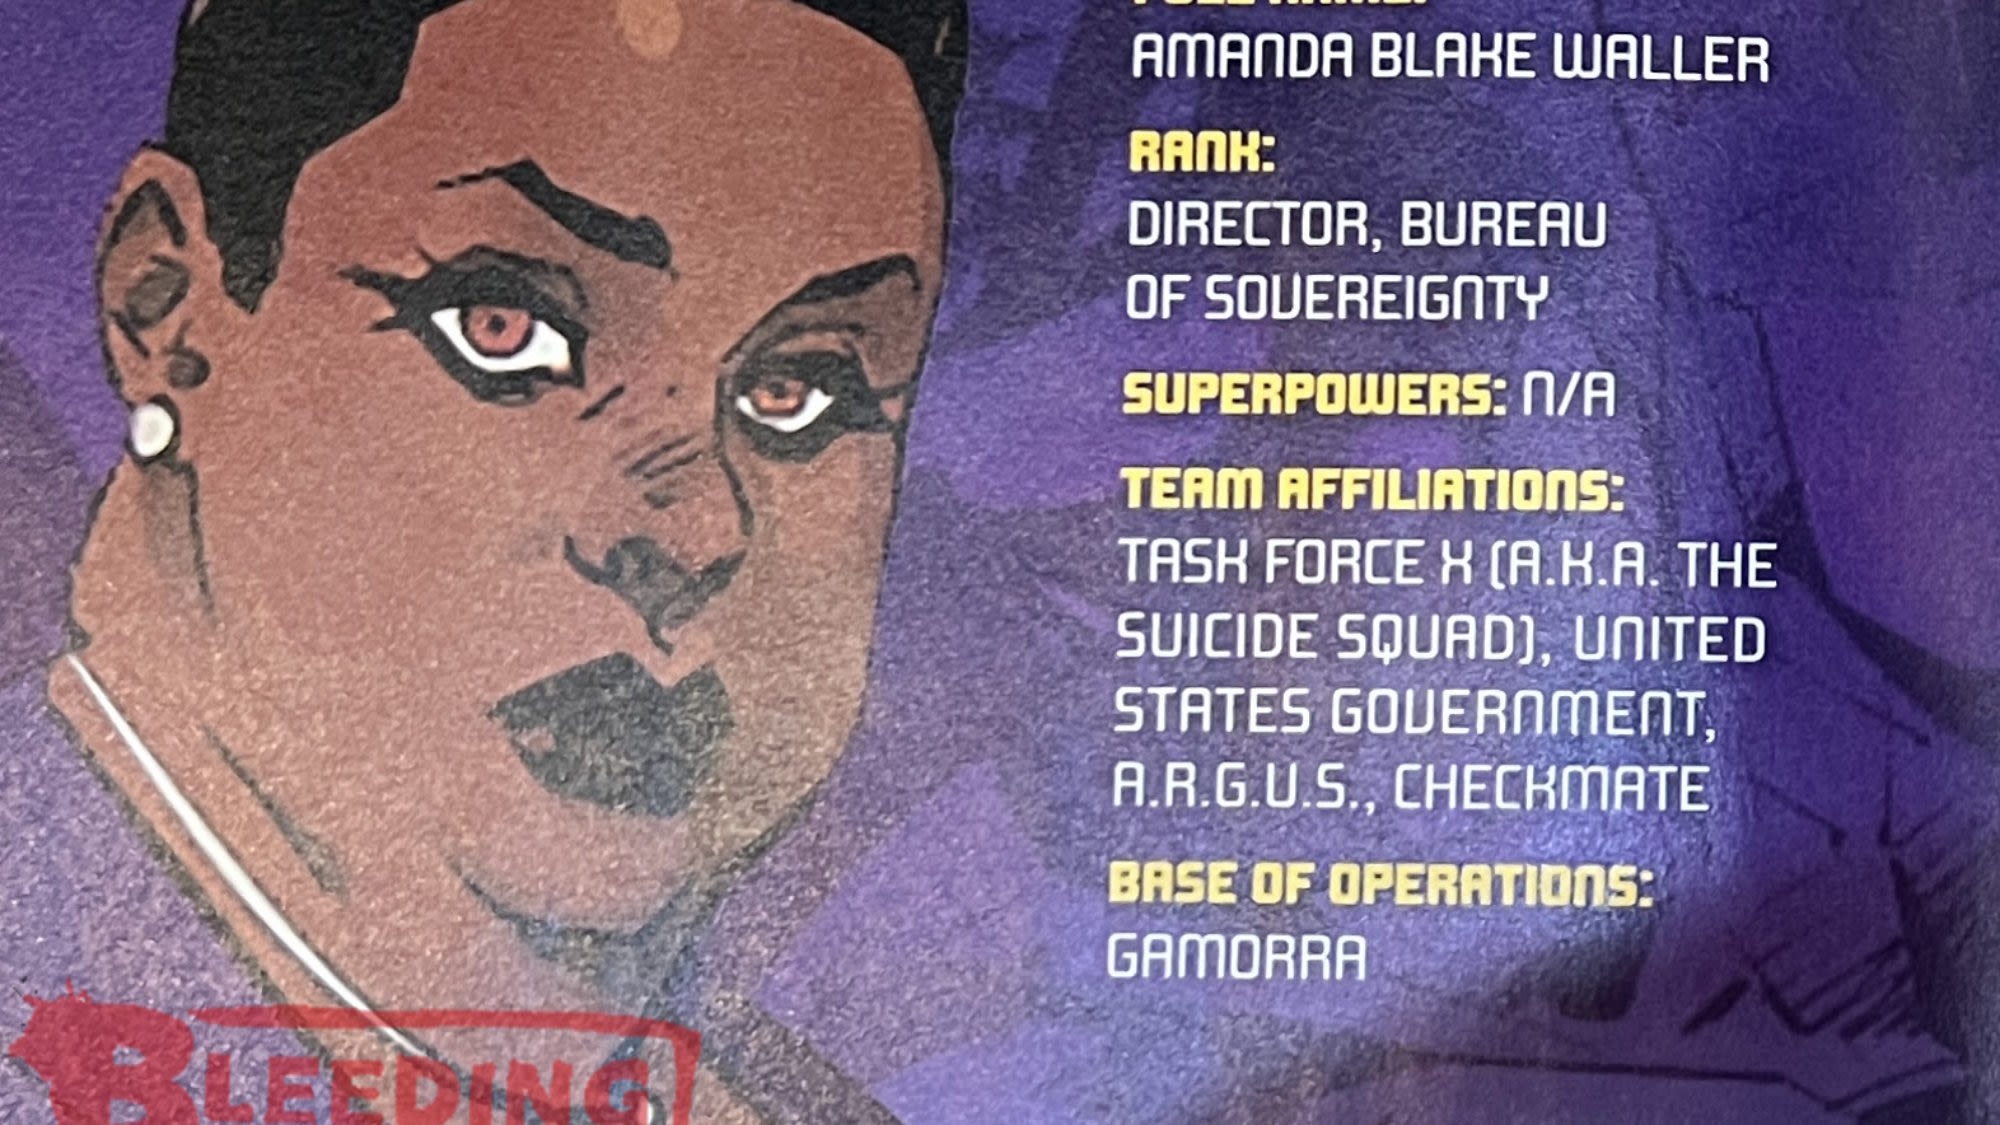 Amanda Waller & Absolute Power In Suicide Squad/Action Comics Spoilers